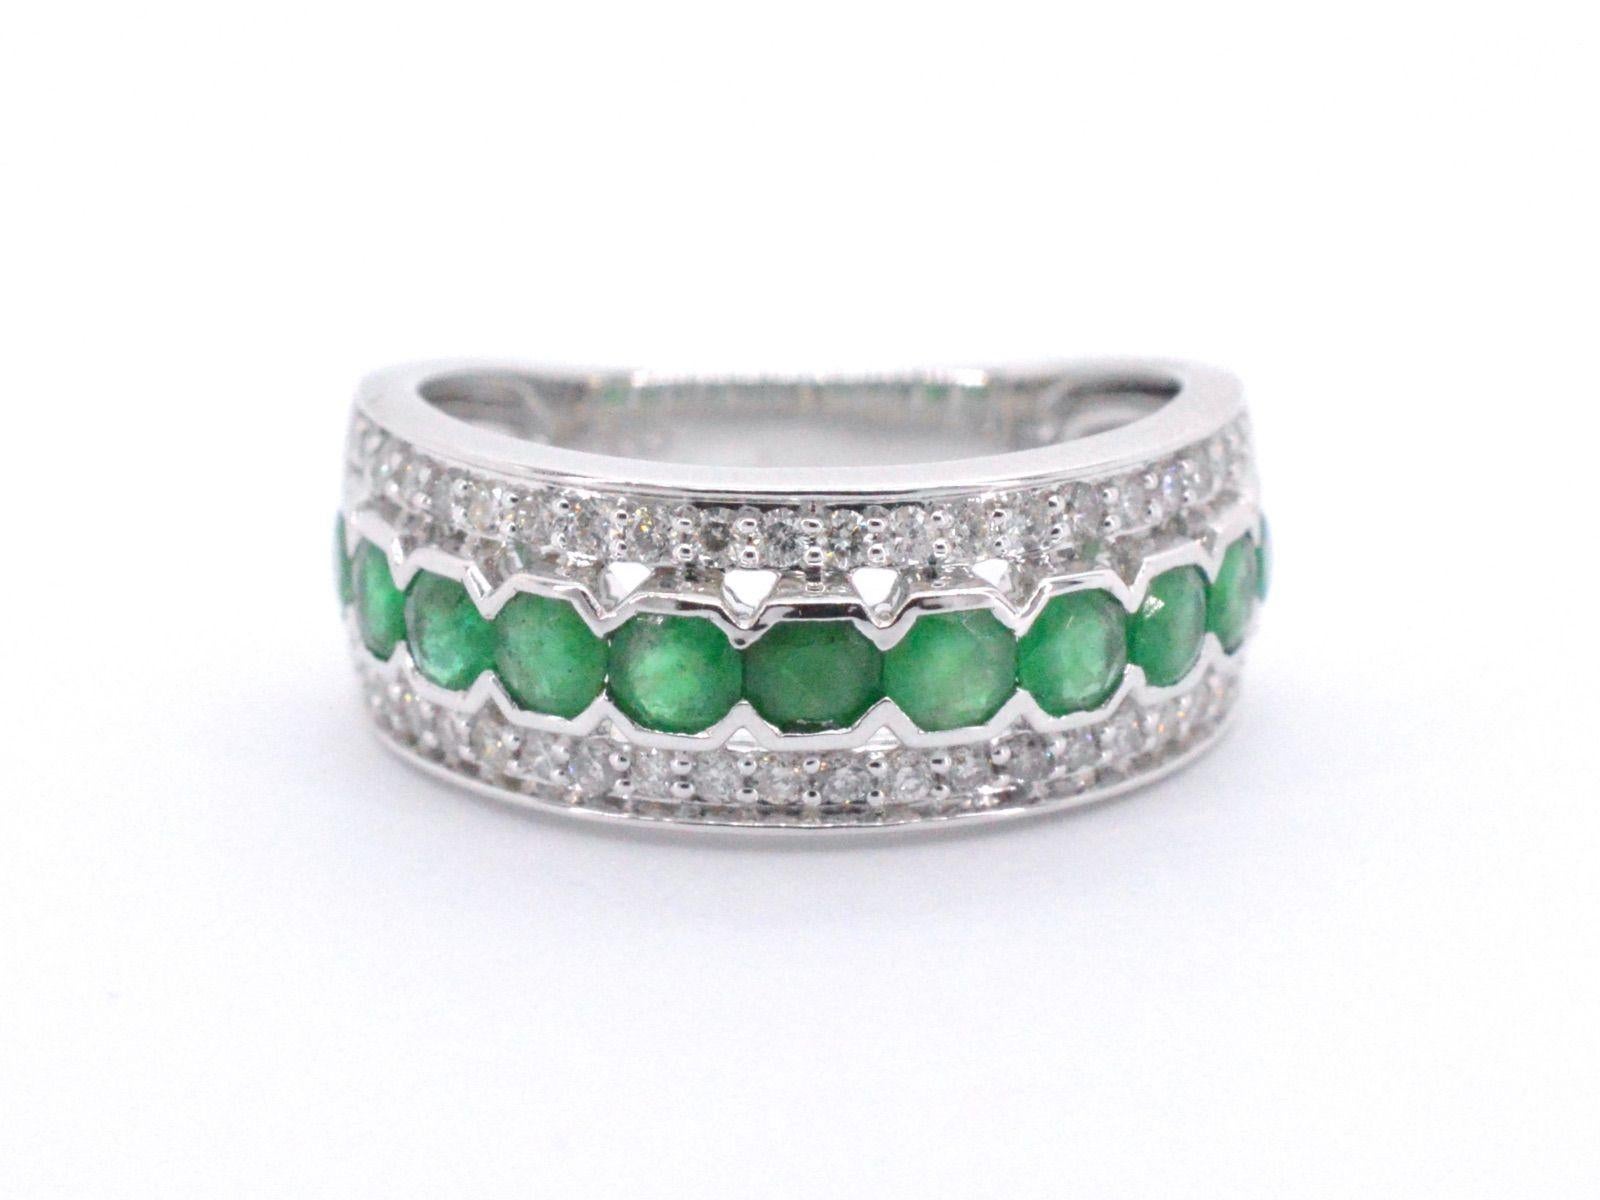 Women's White Gold Ring with Diamonds and Emerald For Sale